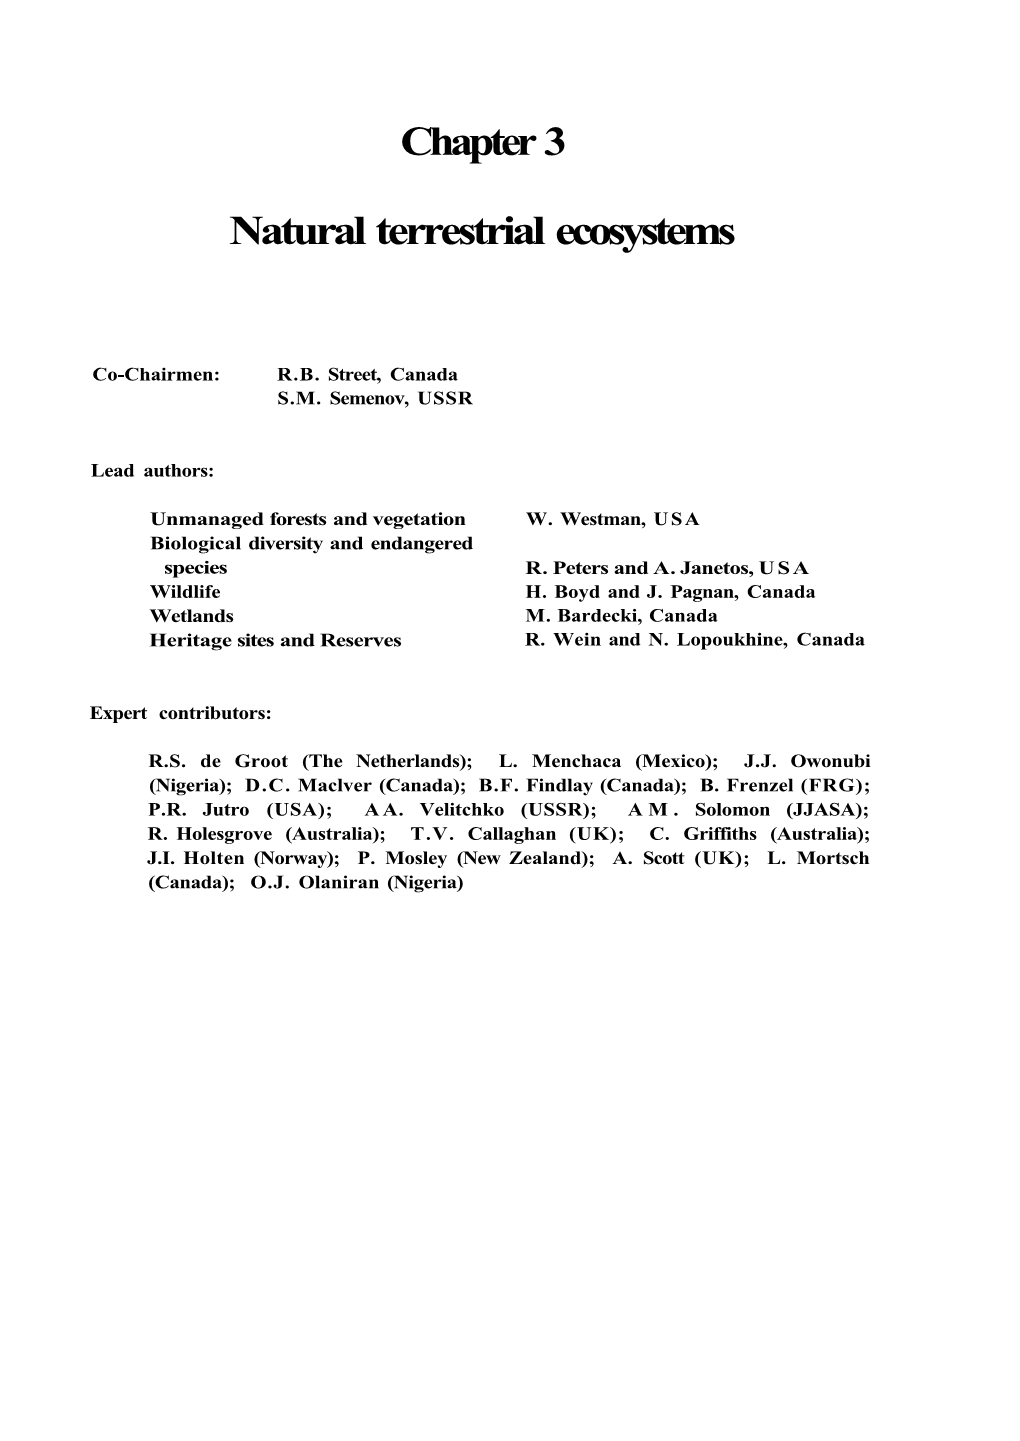 Chapter 3 Natural Terrestrial Ecosystems